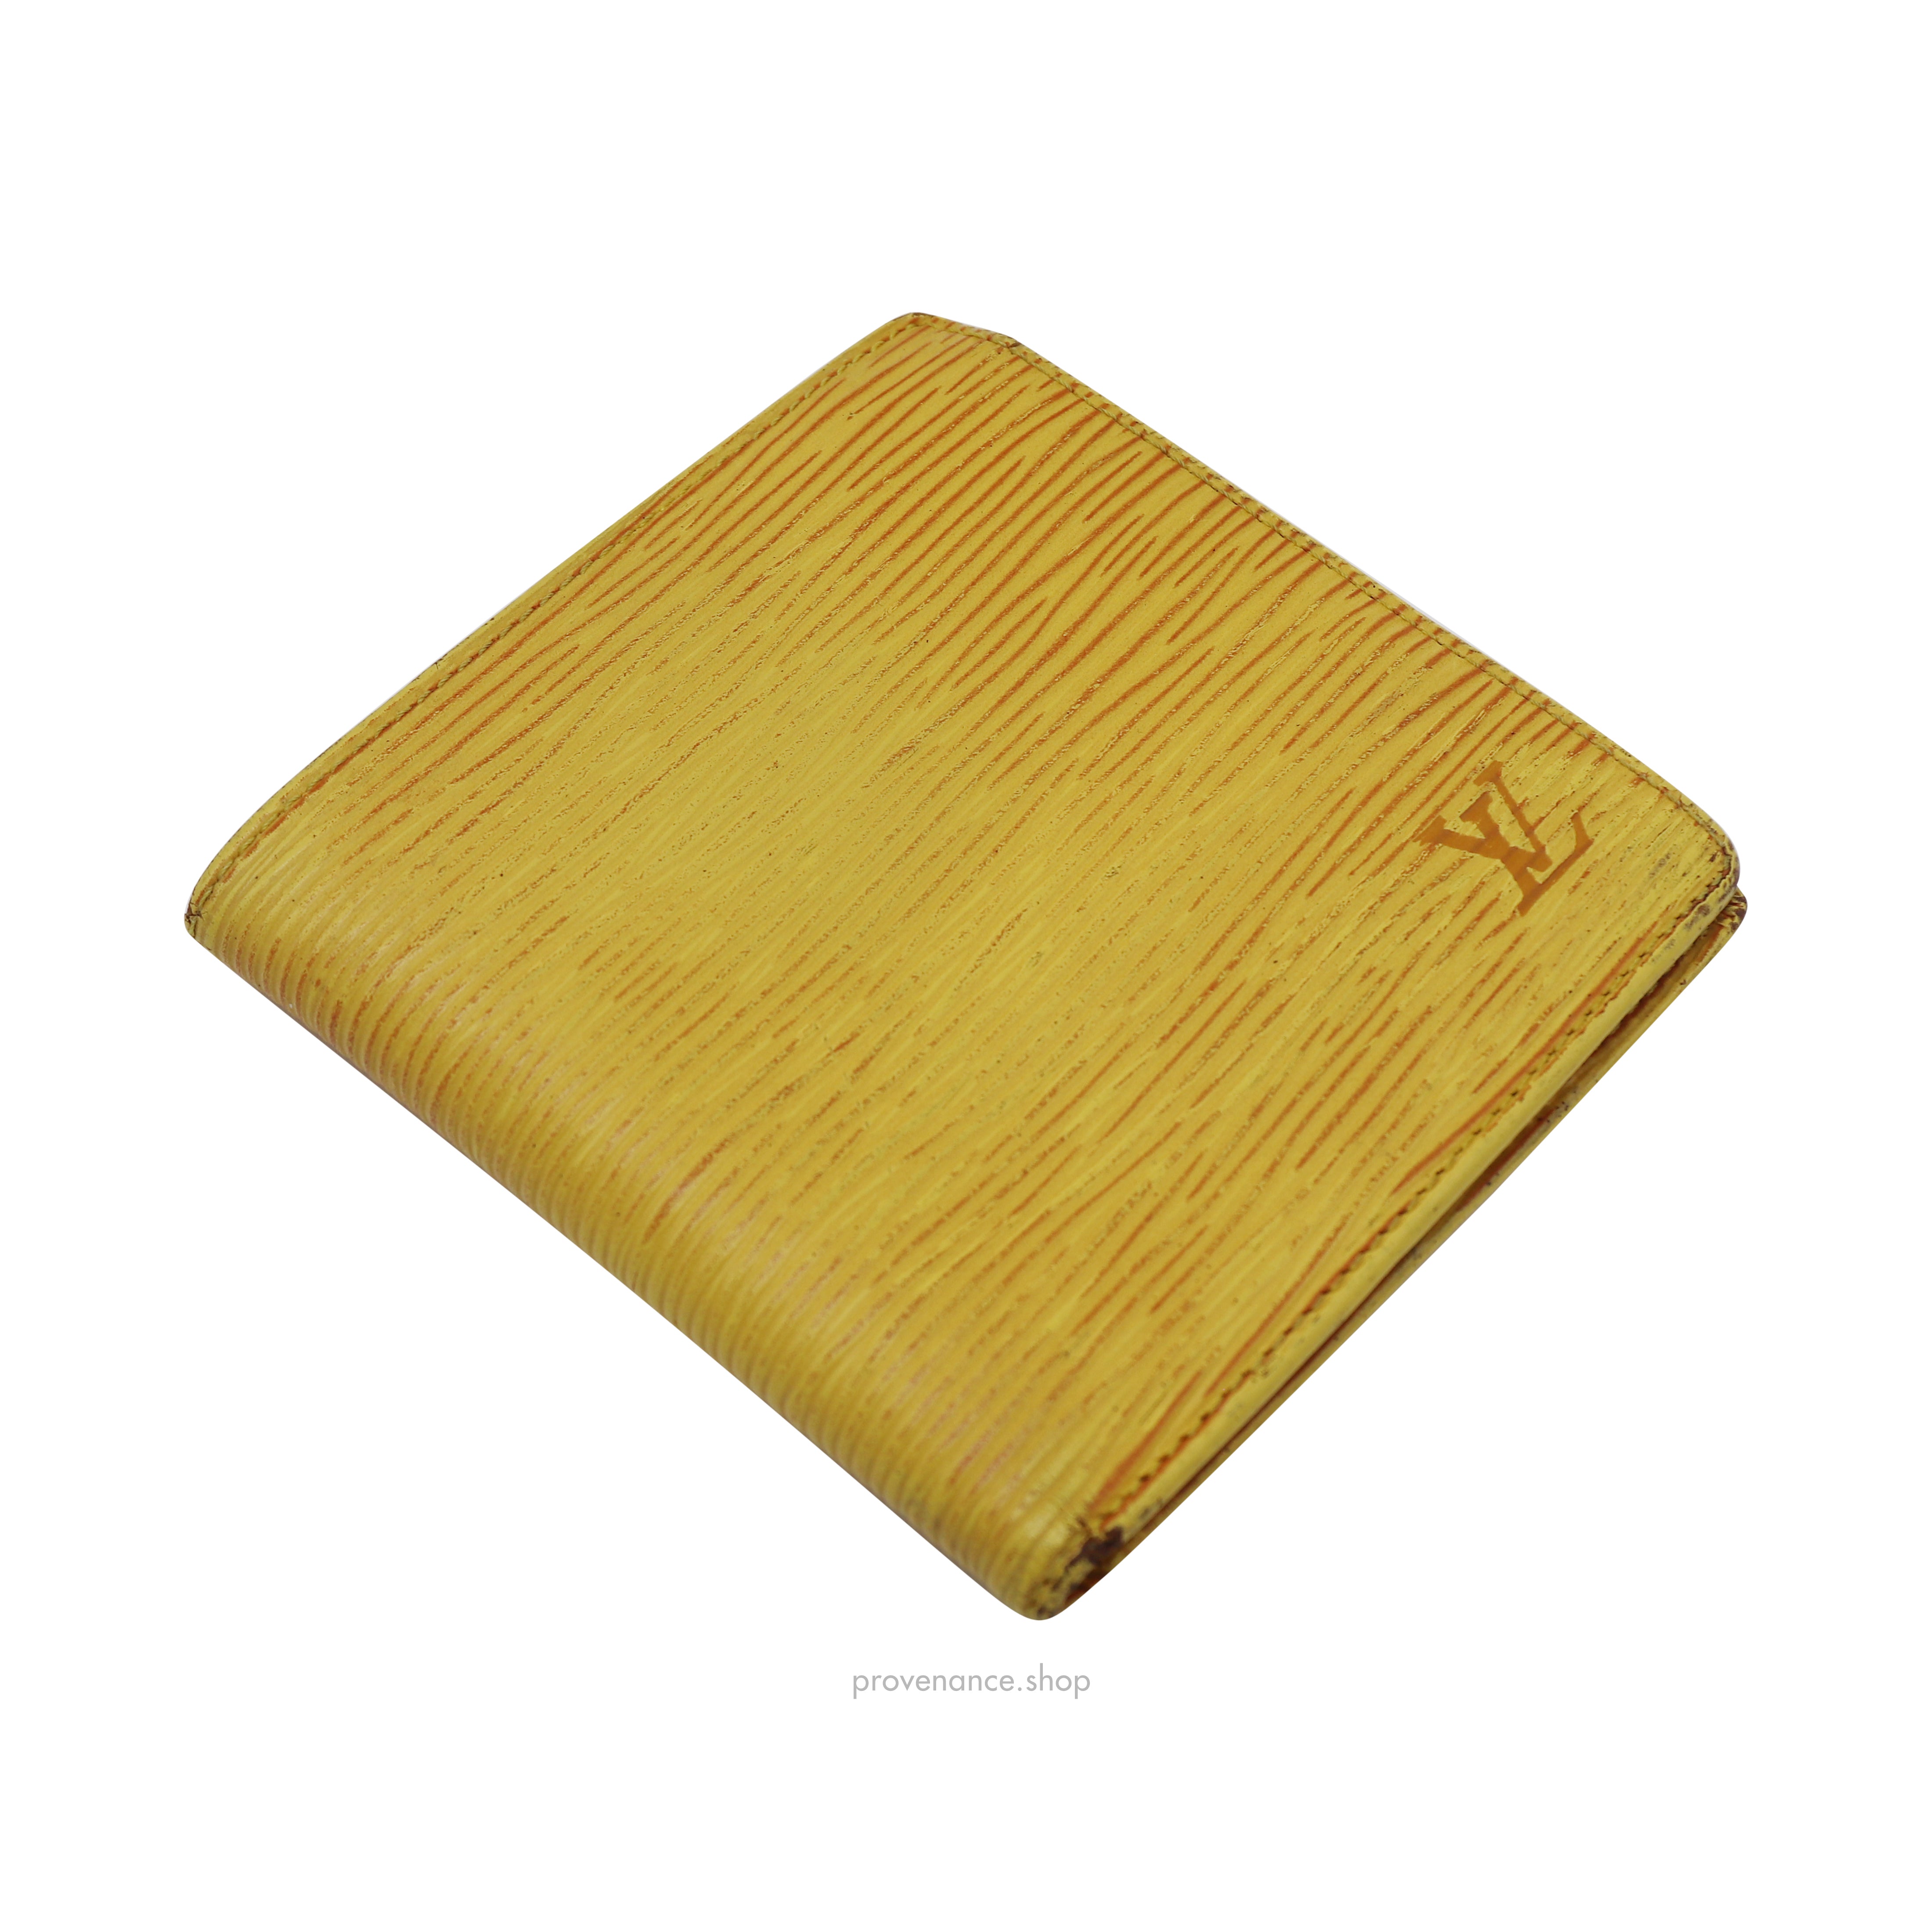 Louis Vuitton Marco Wallet in Tassil Yellow EPI Leather